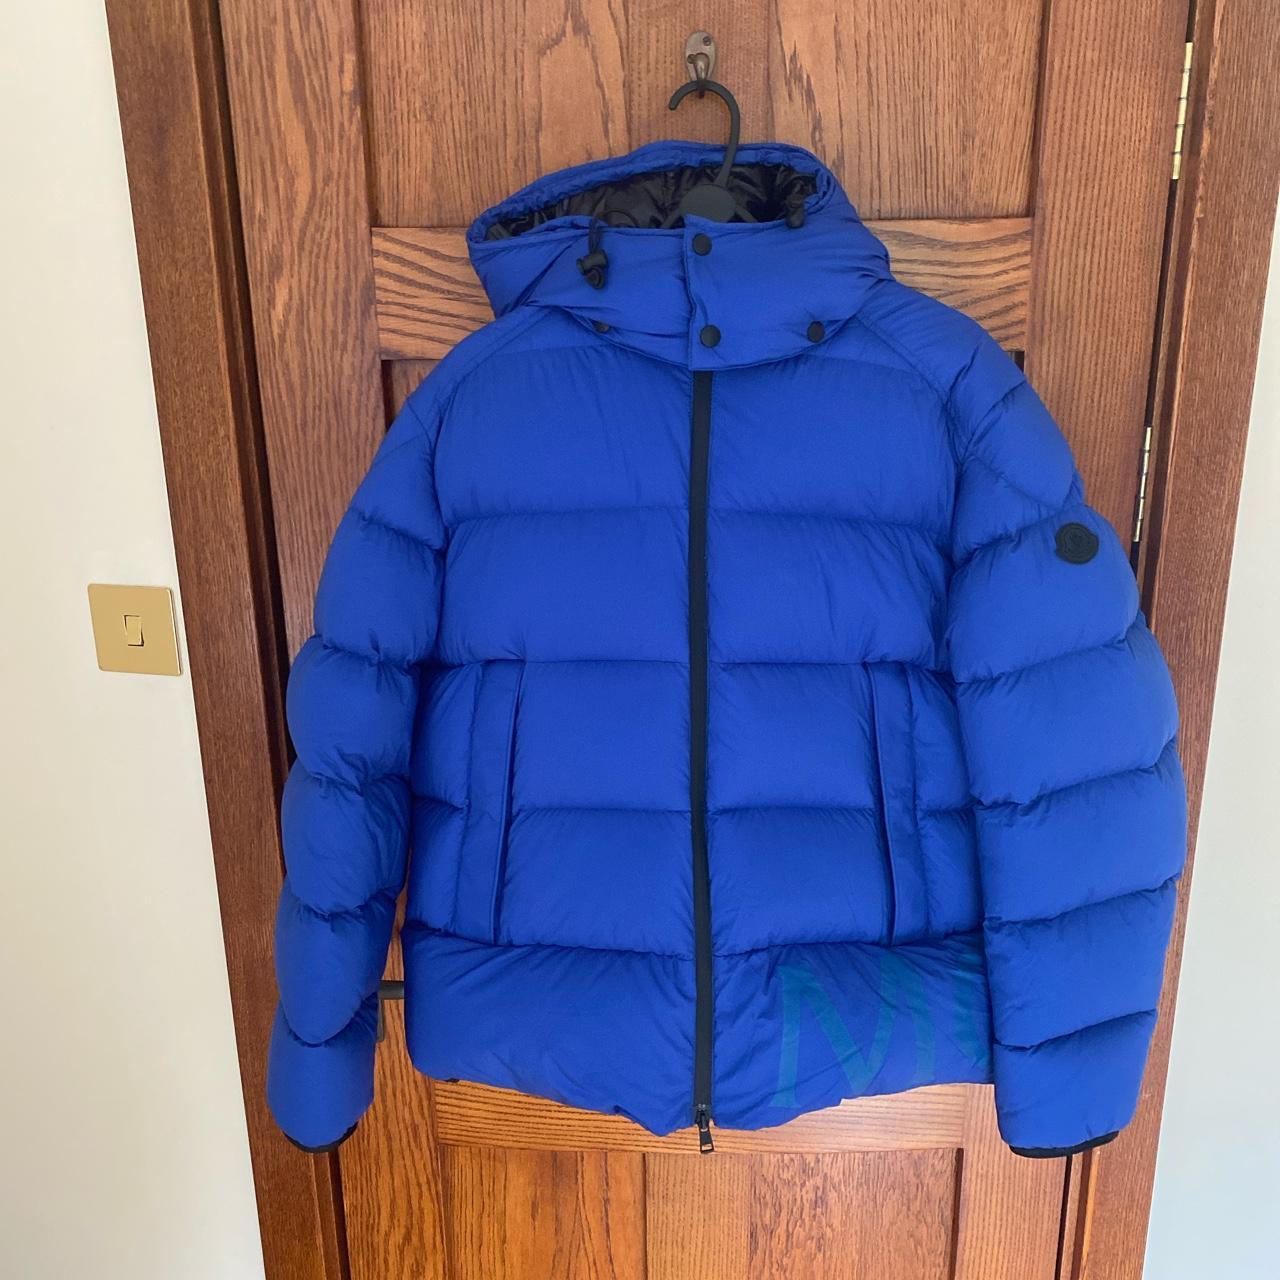 Mens puffer moncler jacket in a bright blue. Has... - Depop